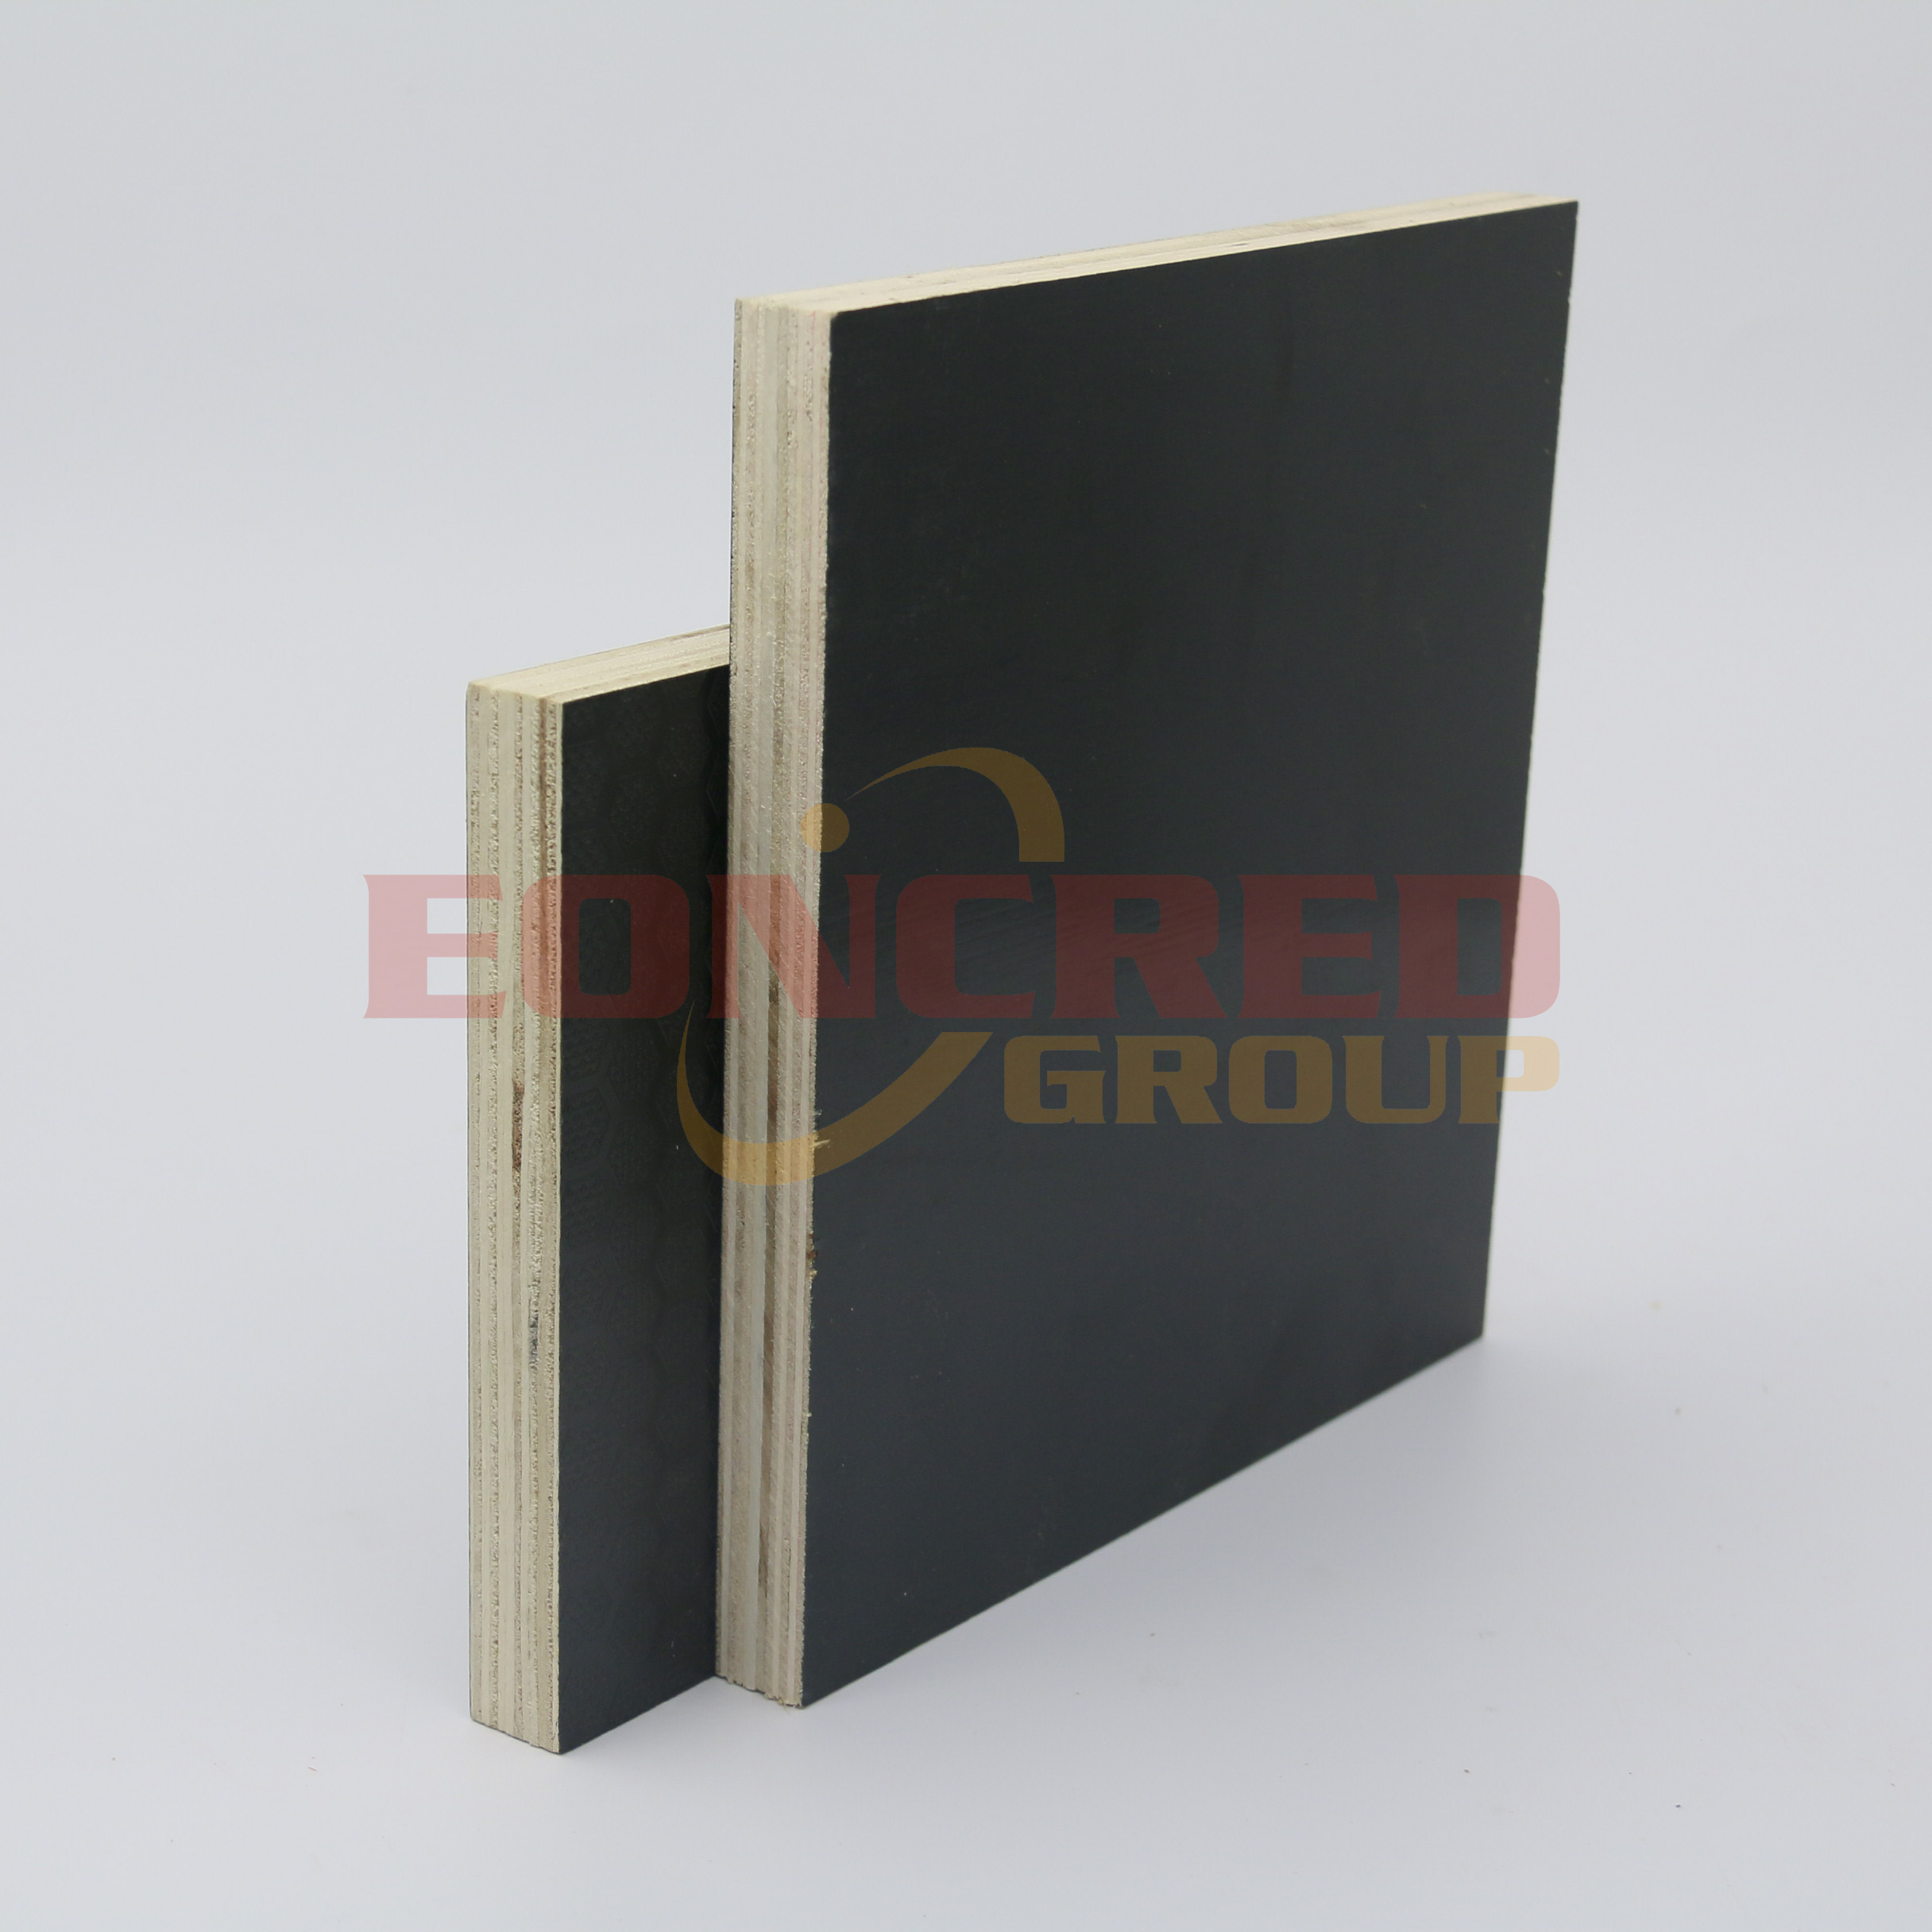 Linyi plywood manufacturer shuttering plywood 18mm whole full poplar core film faced plywood